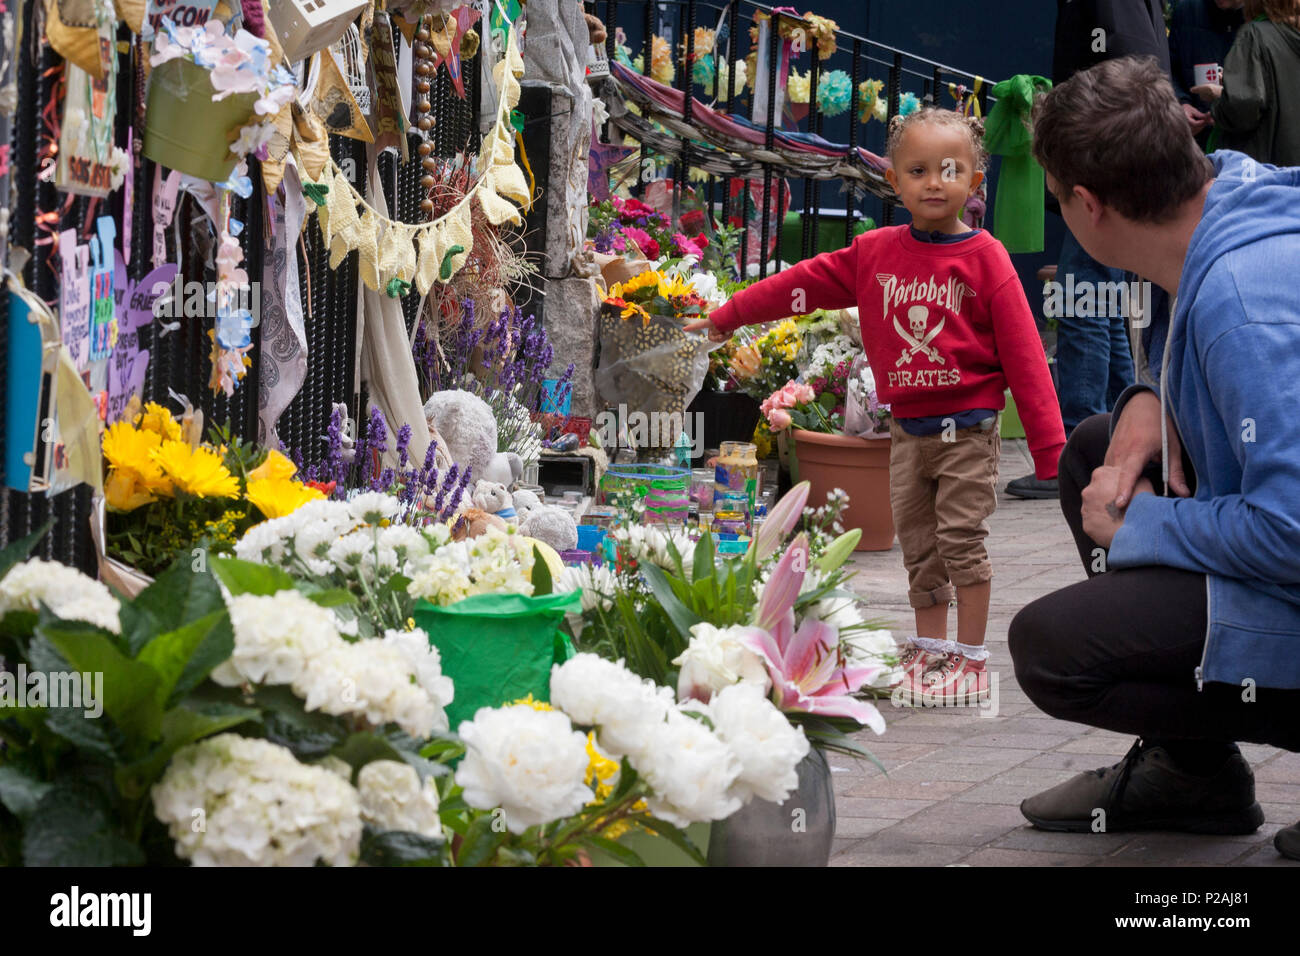 London, UK. 14th Jun, 2018.  A young child looks at flowers left near where the Grenfell fire occured, on the first anniversary of the tower block disaster. 72 people died when the tower block in the borough of Kensington & Chelsea were killed in what has been called the largest fire since WW2. The 24-storey Grenfell Tower block of public housing flats in North Kensington, West London, United Kingdom. It caused 72 deaths, out of the 293 people in the building, including 2 who escaped and died in hospital. Over 70 were injured and left traumatised. Credit: RichardBaker/Alamy Live News Stock Photo